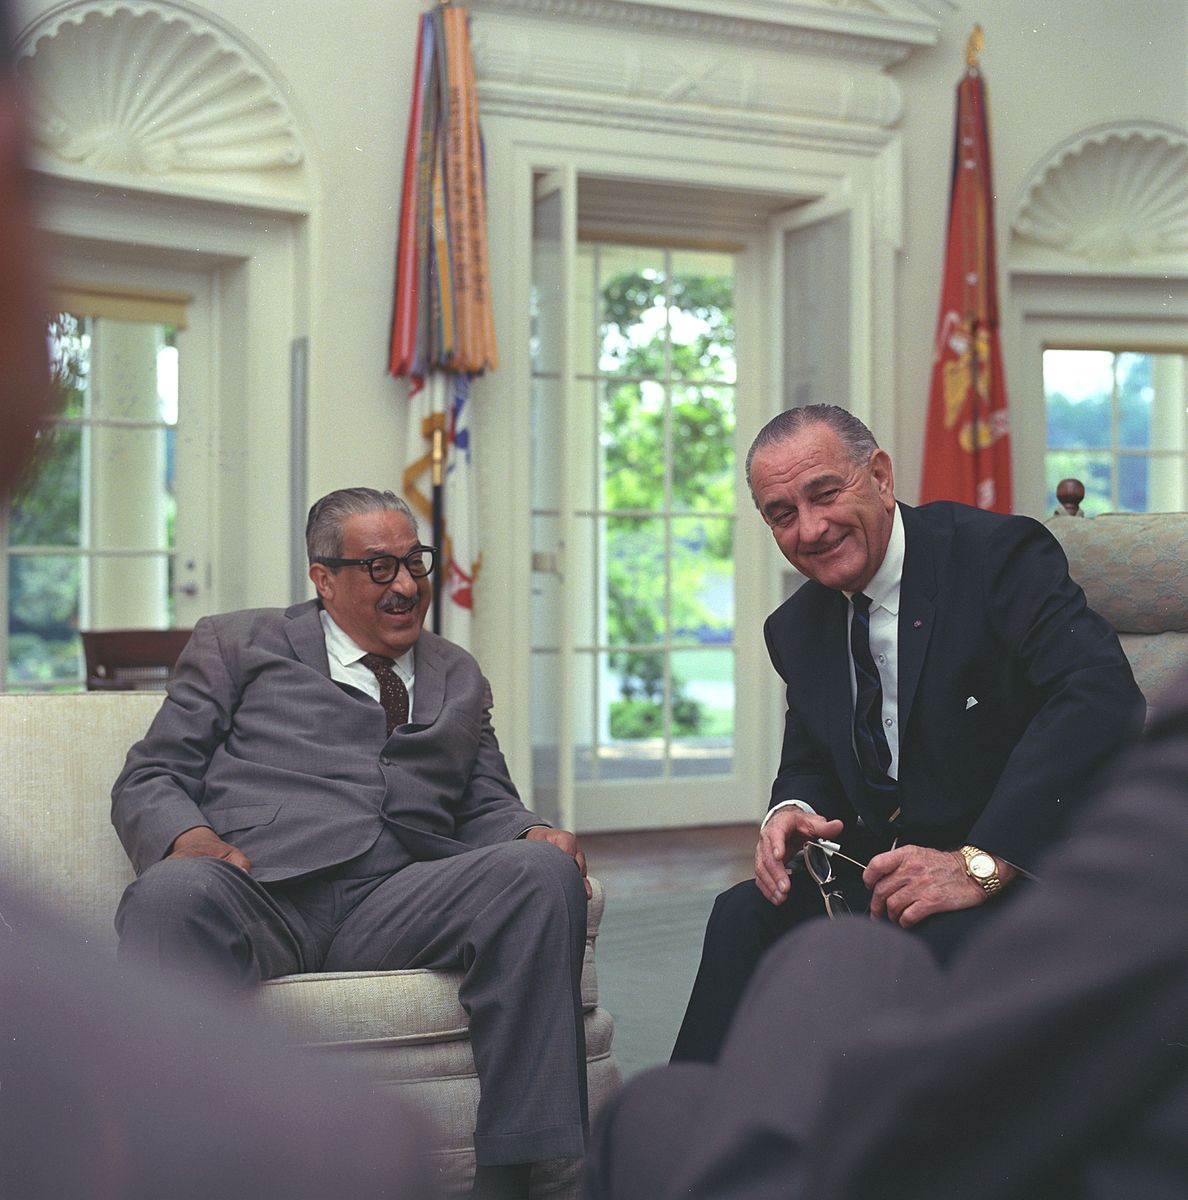 Thurgood Marshall pictured with Lyndon B. Johnson.